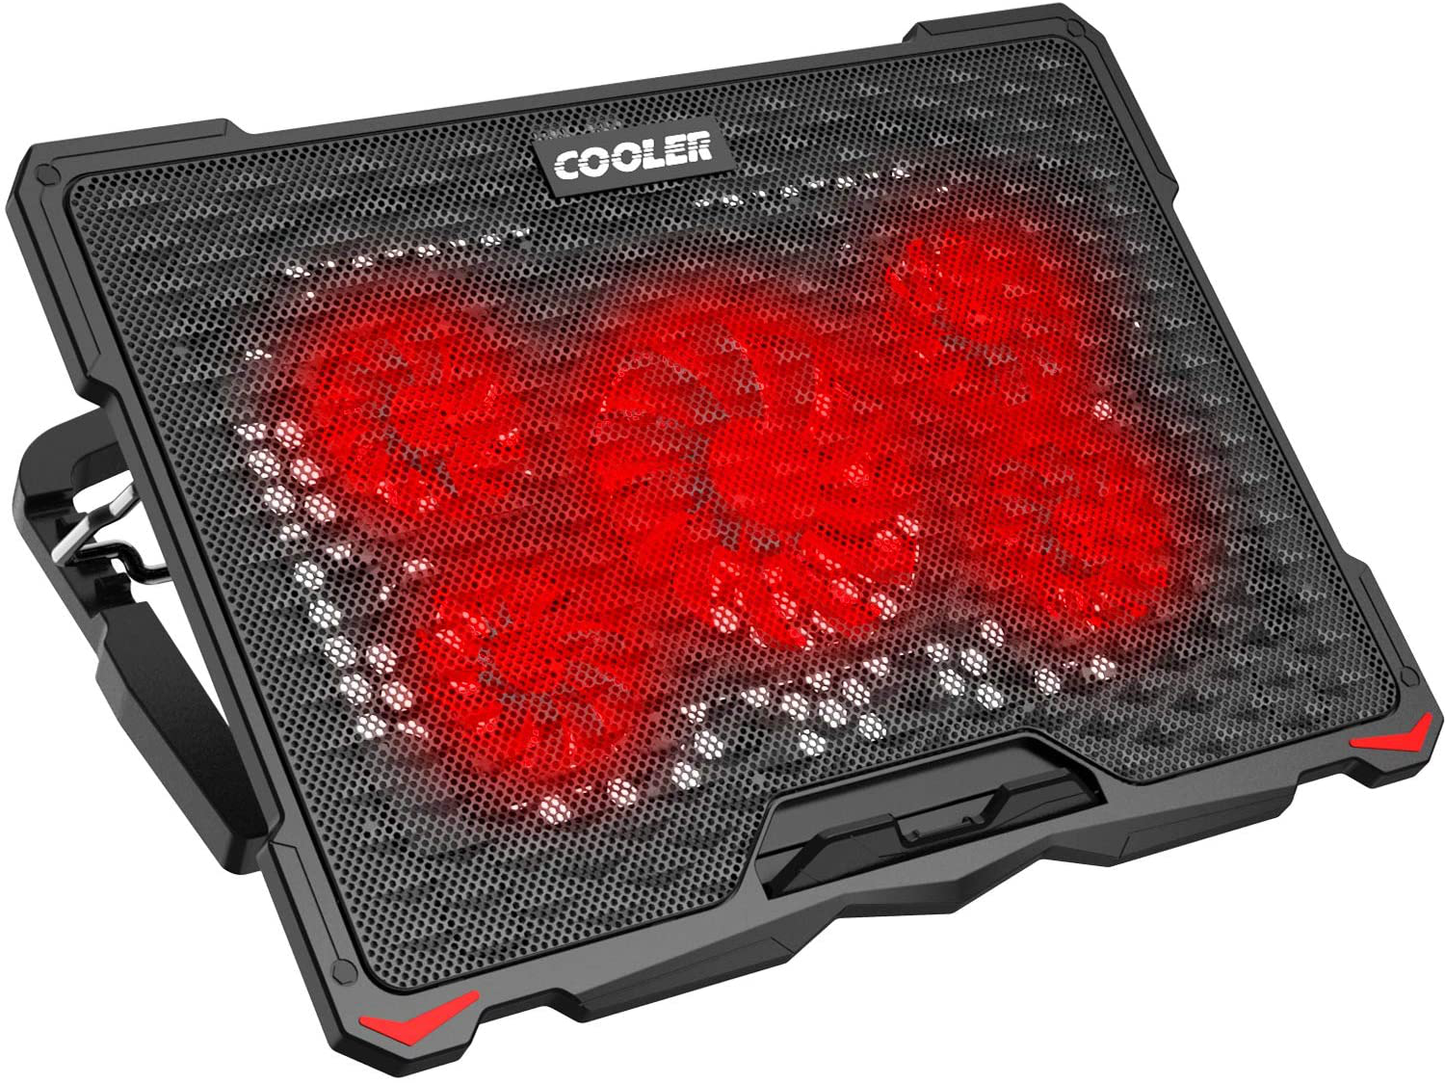 Laptop Cooling Pad 5 Fans Up to 17.3 Inch Heavy Notebook Cooler, Blue LED Lights, 2 USB Ports